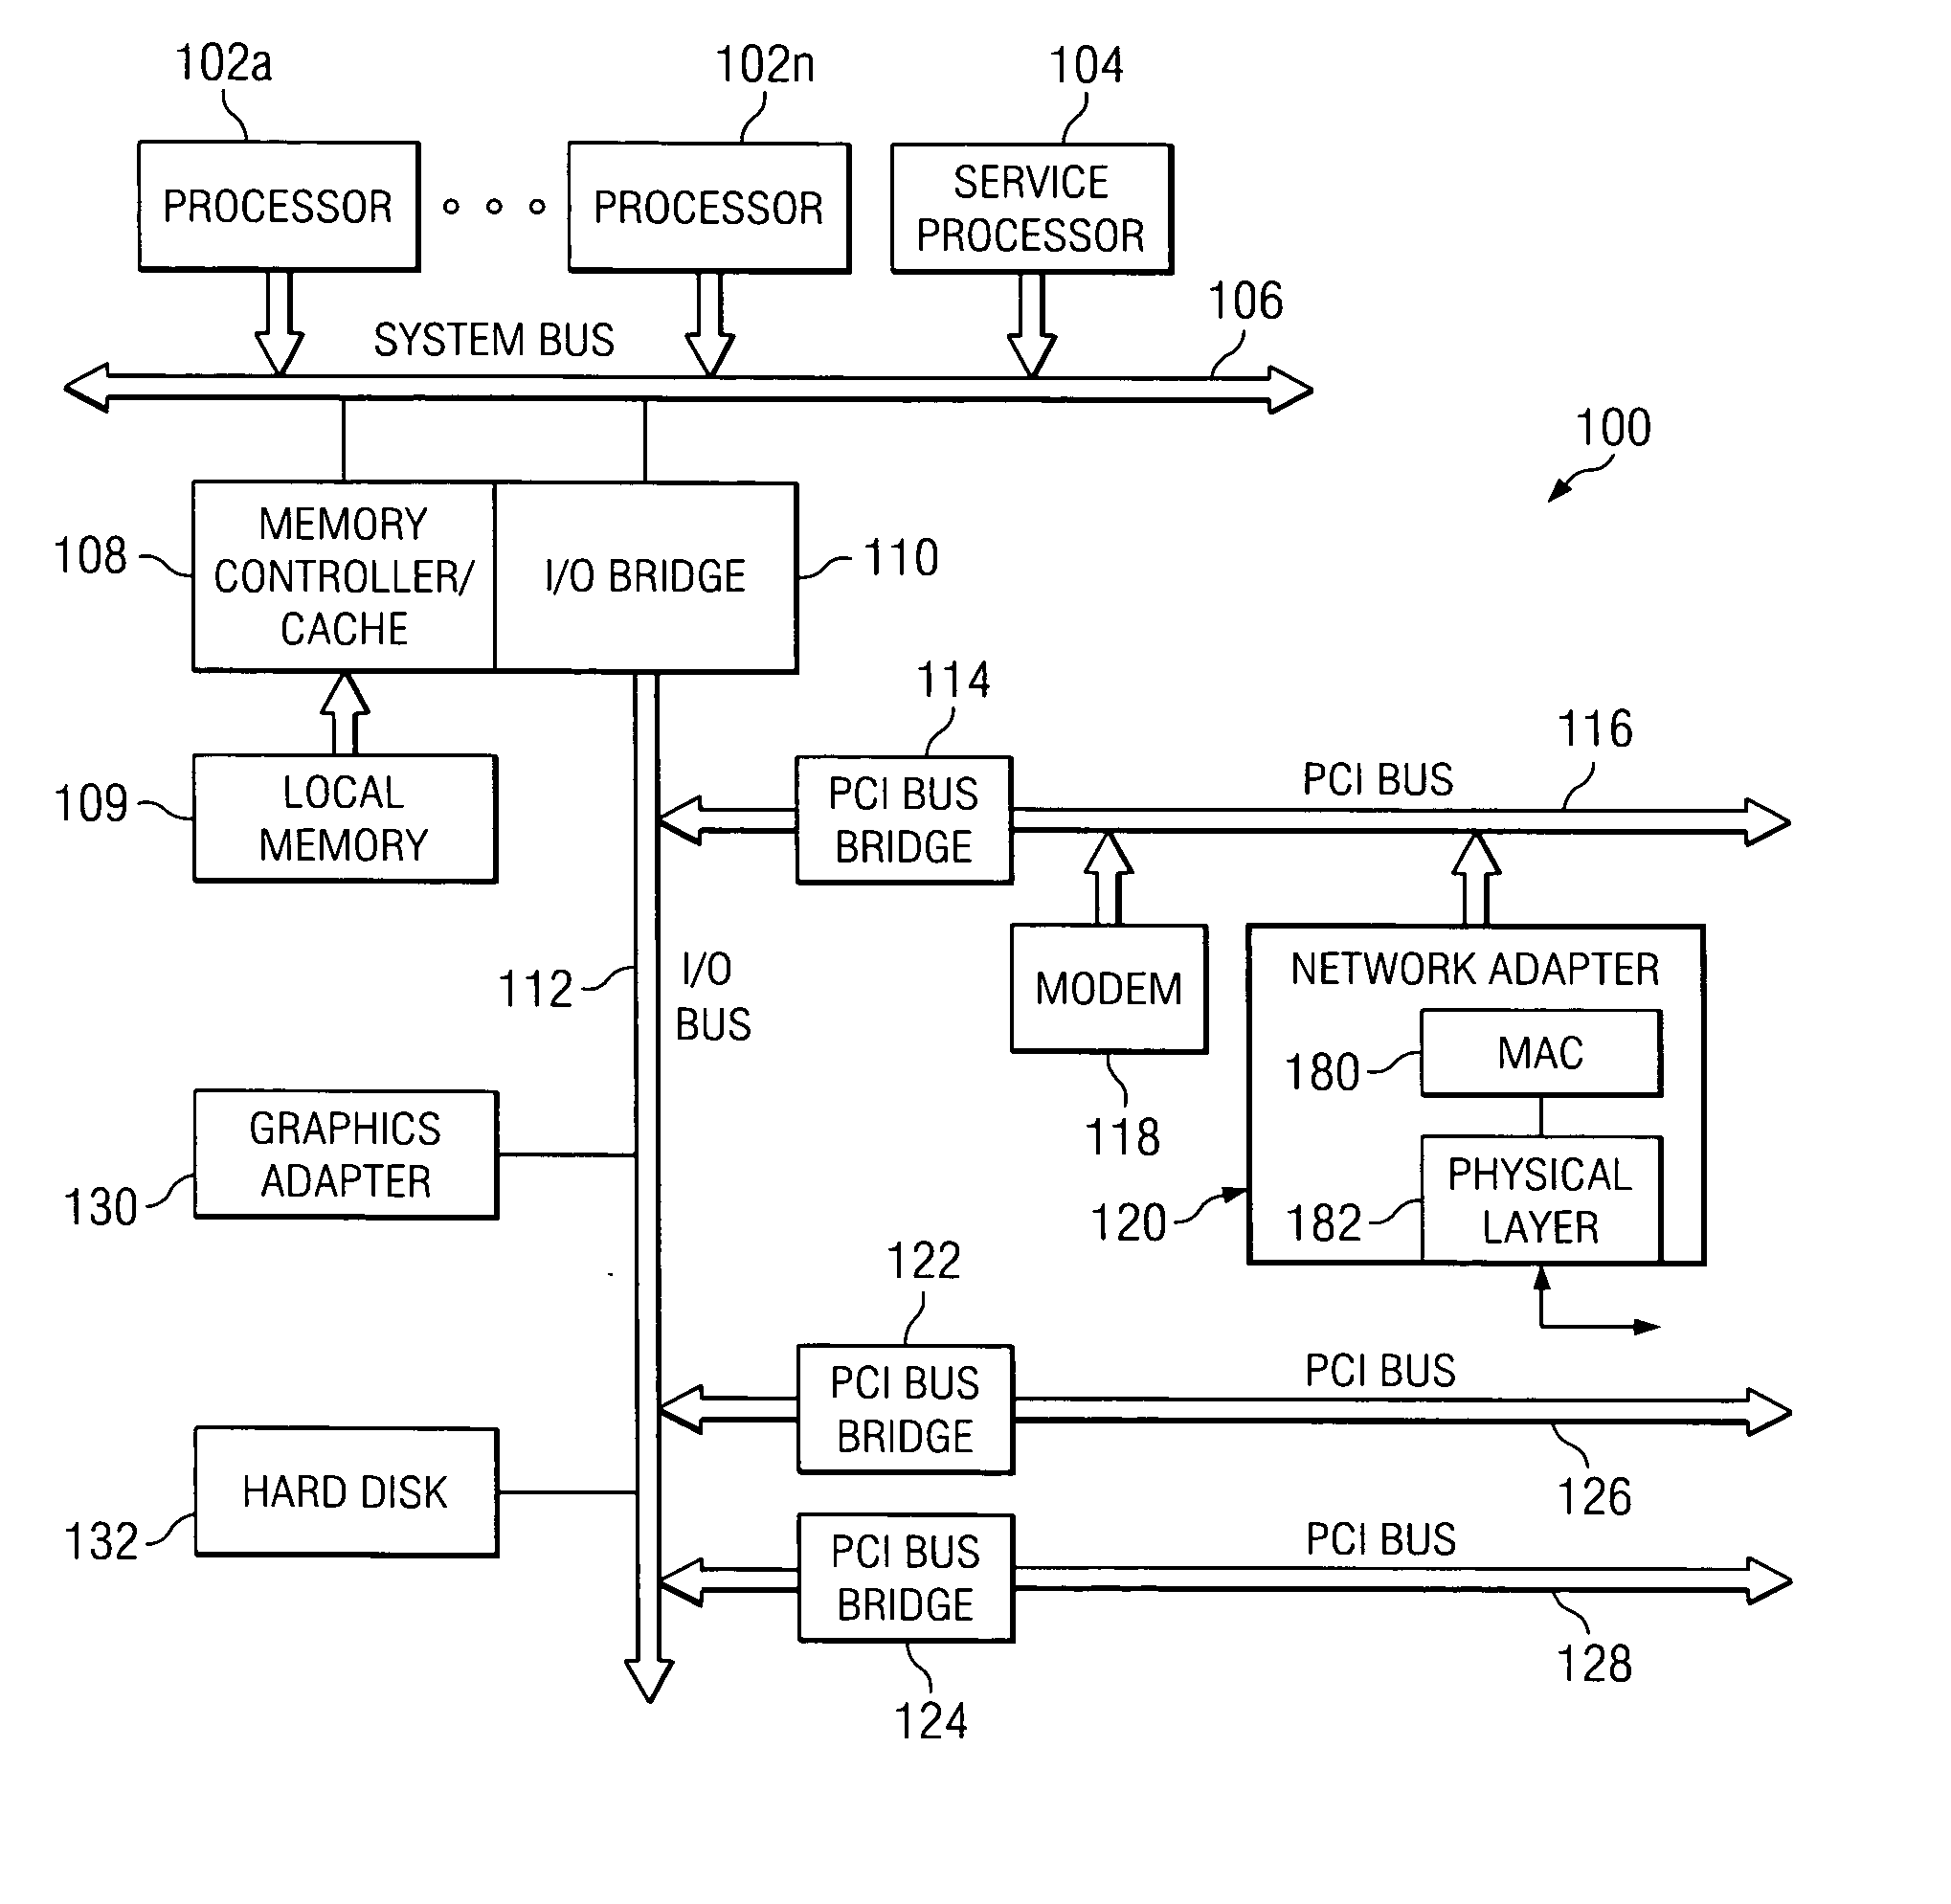 Method and apparatus for frequency independent processor utilization recording register in a simultaneously multi-threaded processor